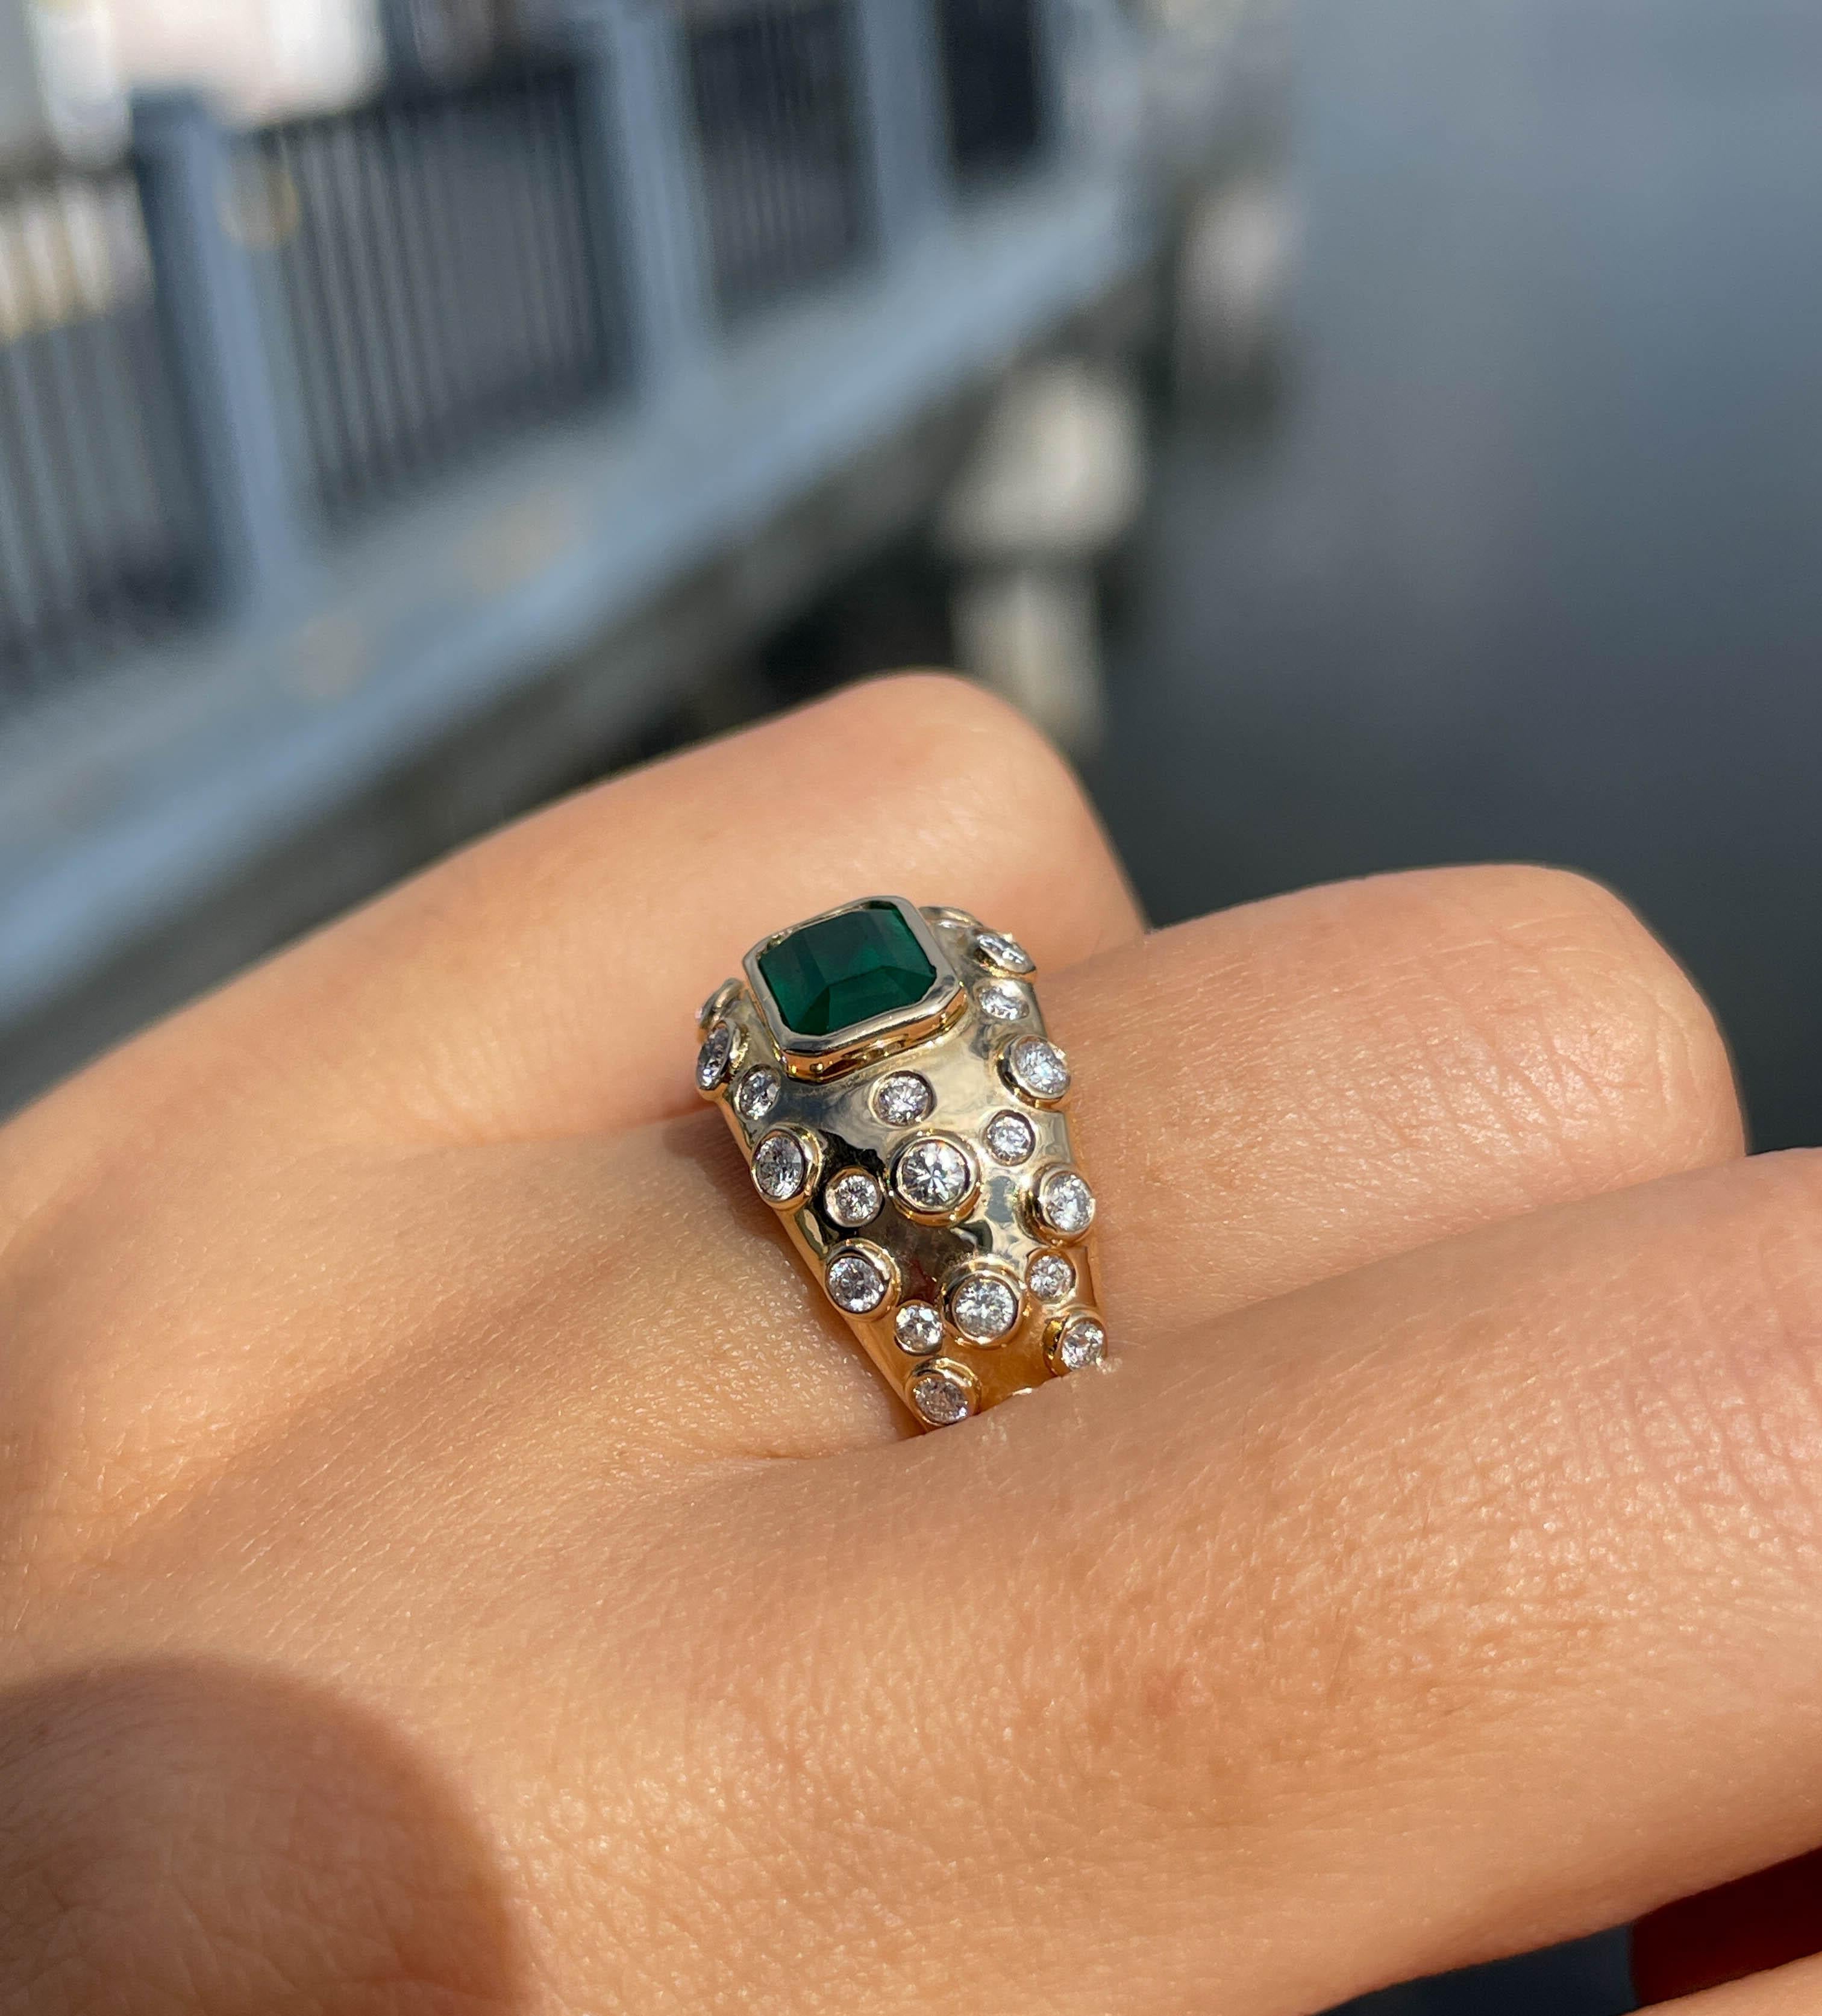 Jay Feder 14k Yellow Gold Green Emerald Diamond Ring In Good Condition For Sale In Boca Raton, FL